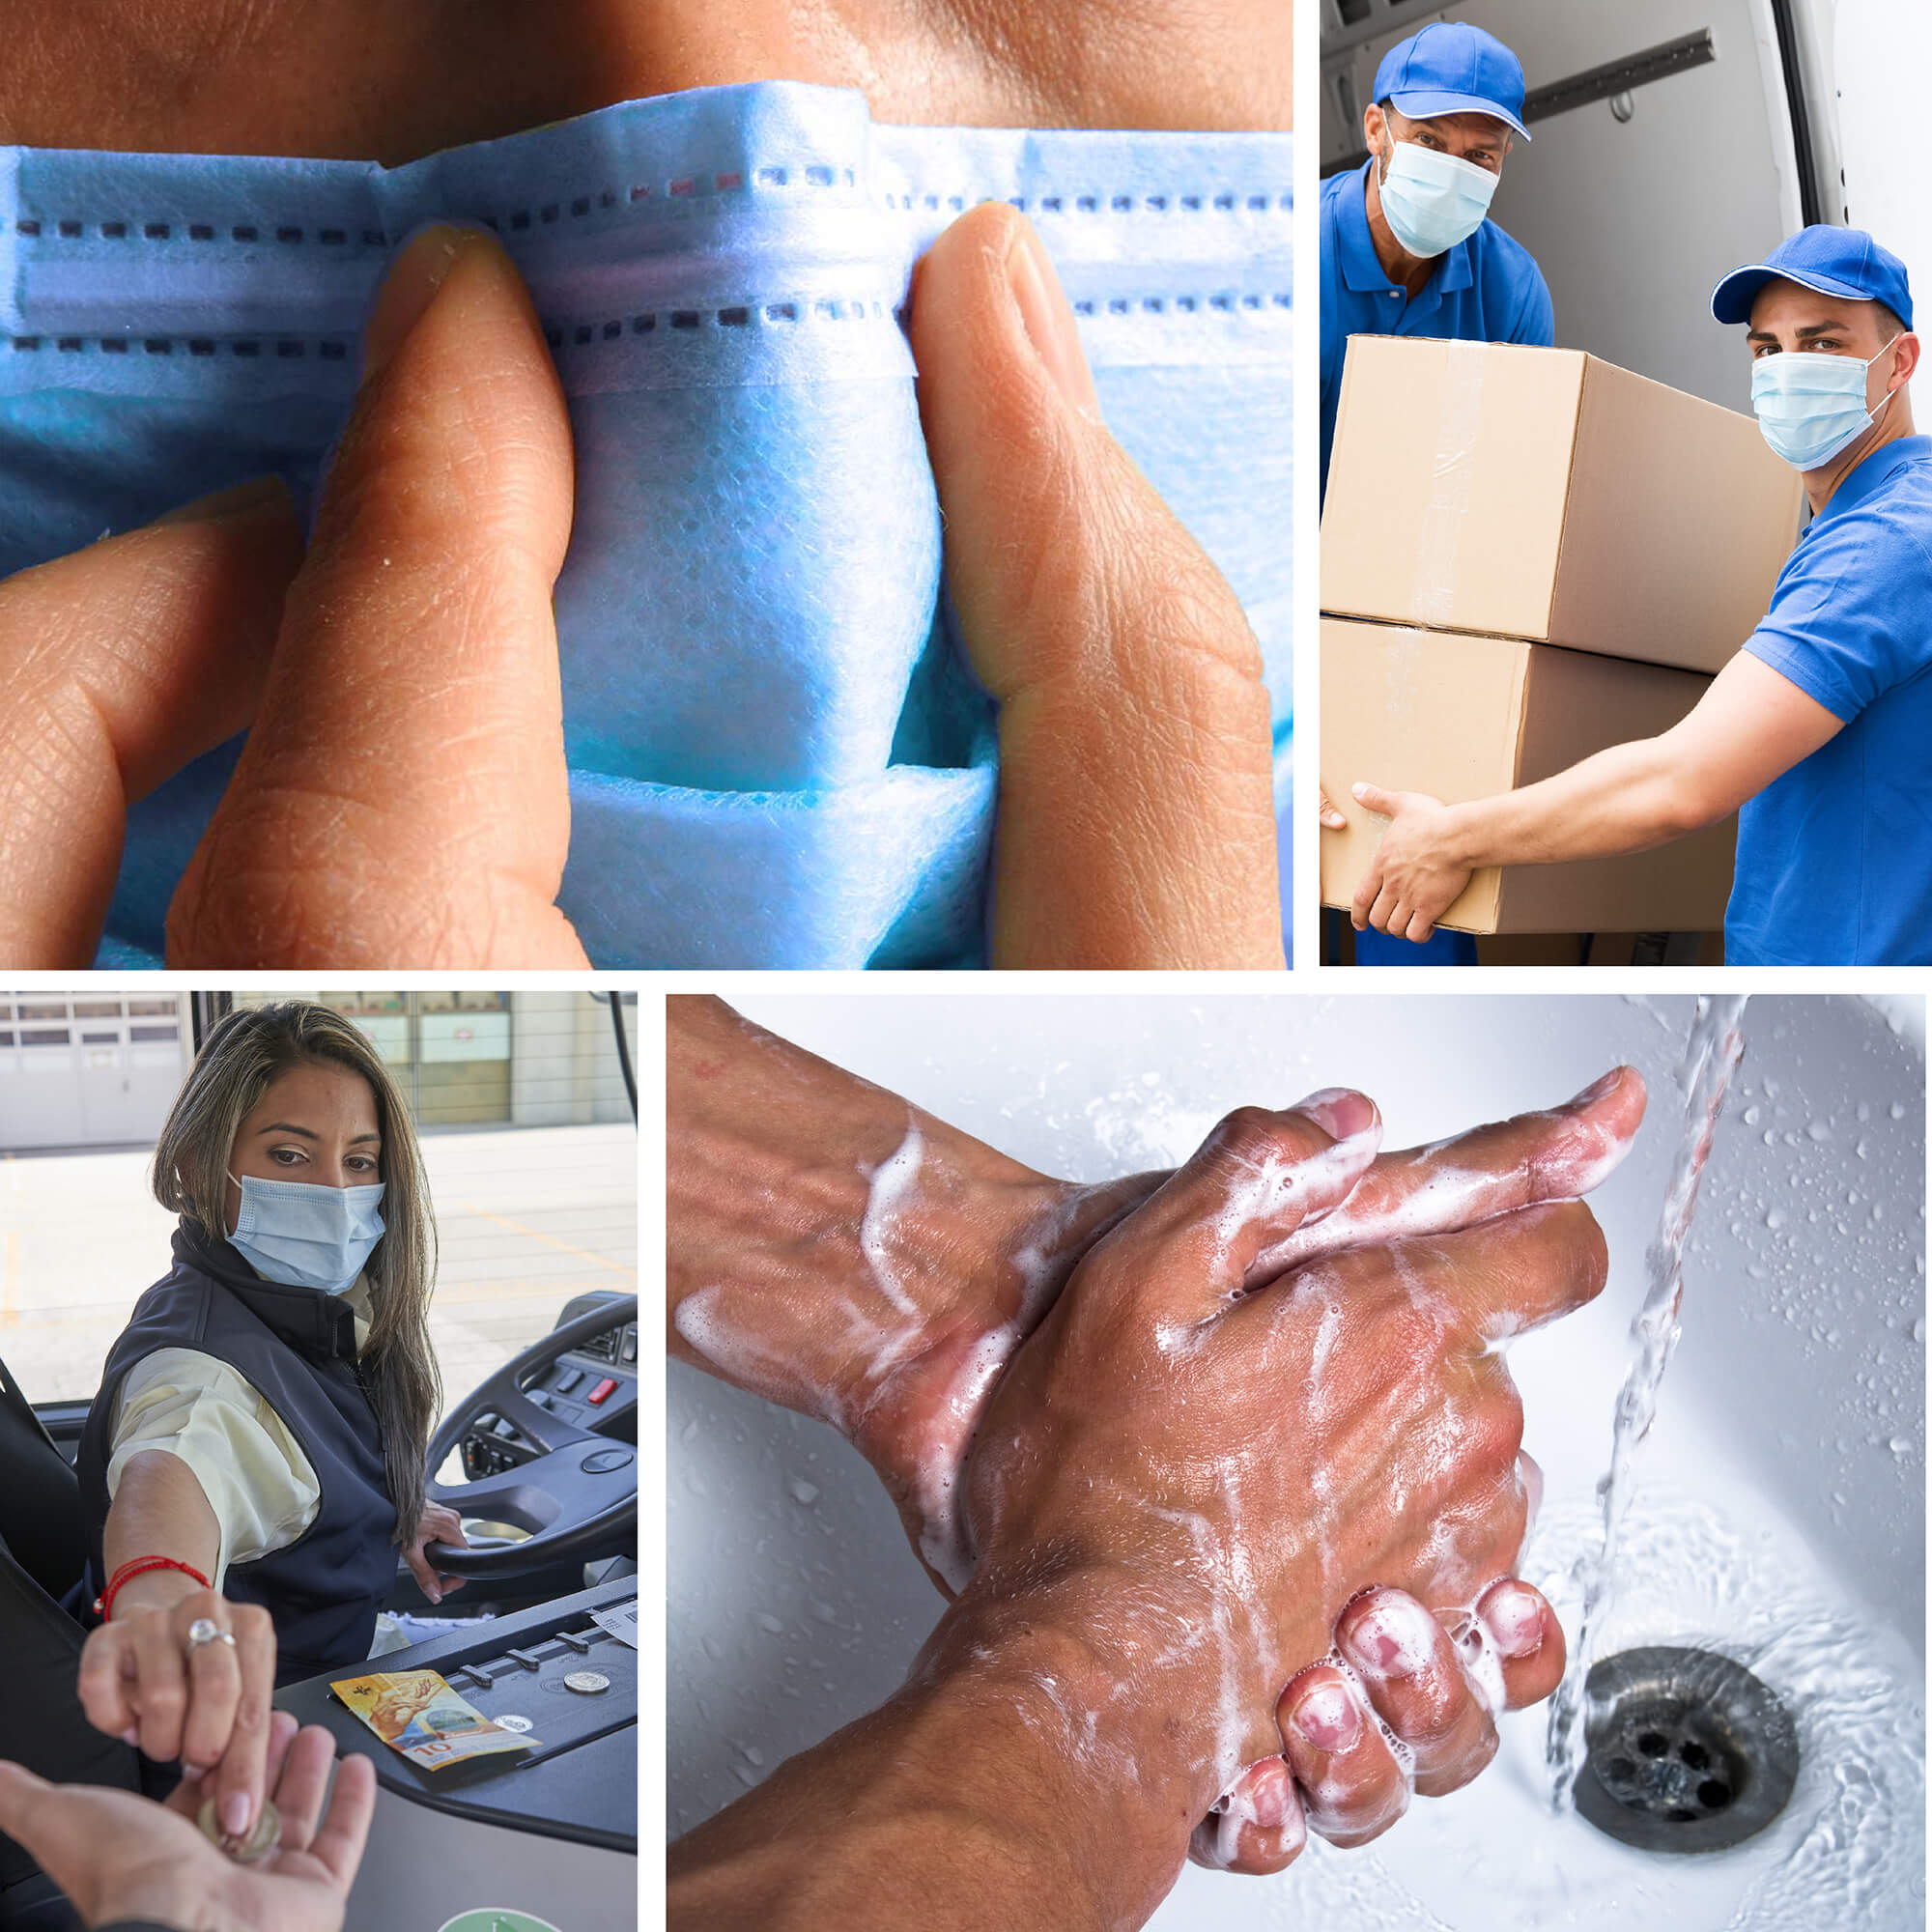 Properly fitting mask, workers wearing masks, driver wearing mask, and proper hand-washing